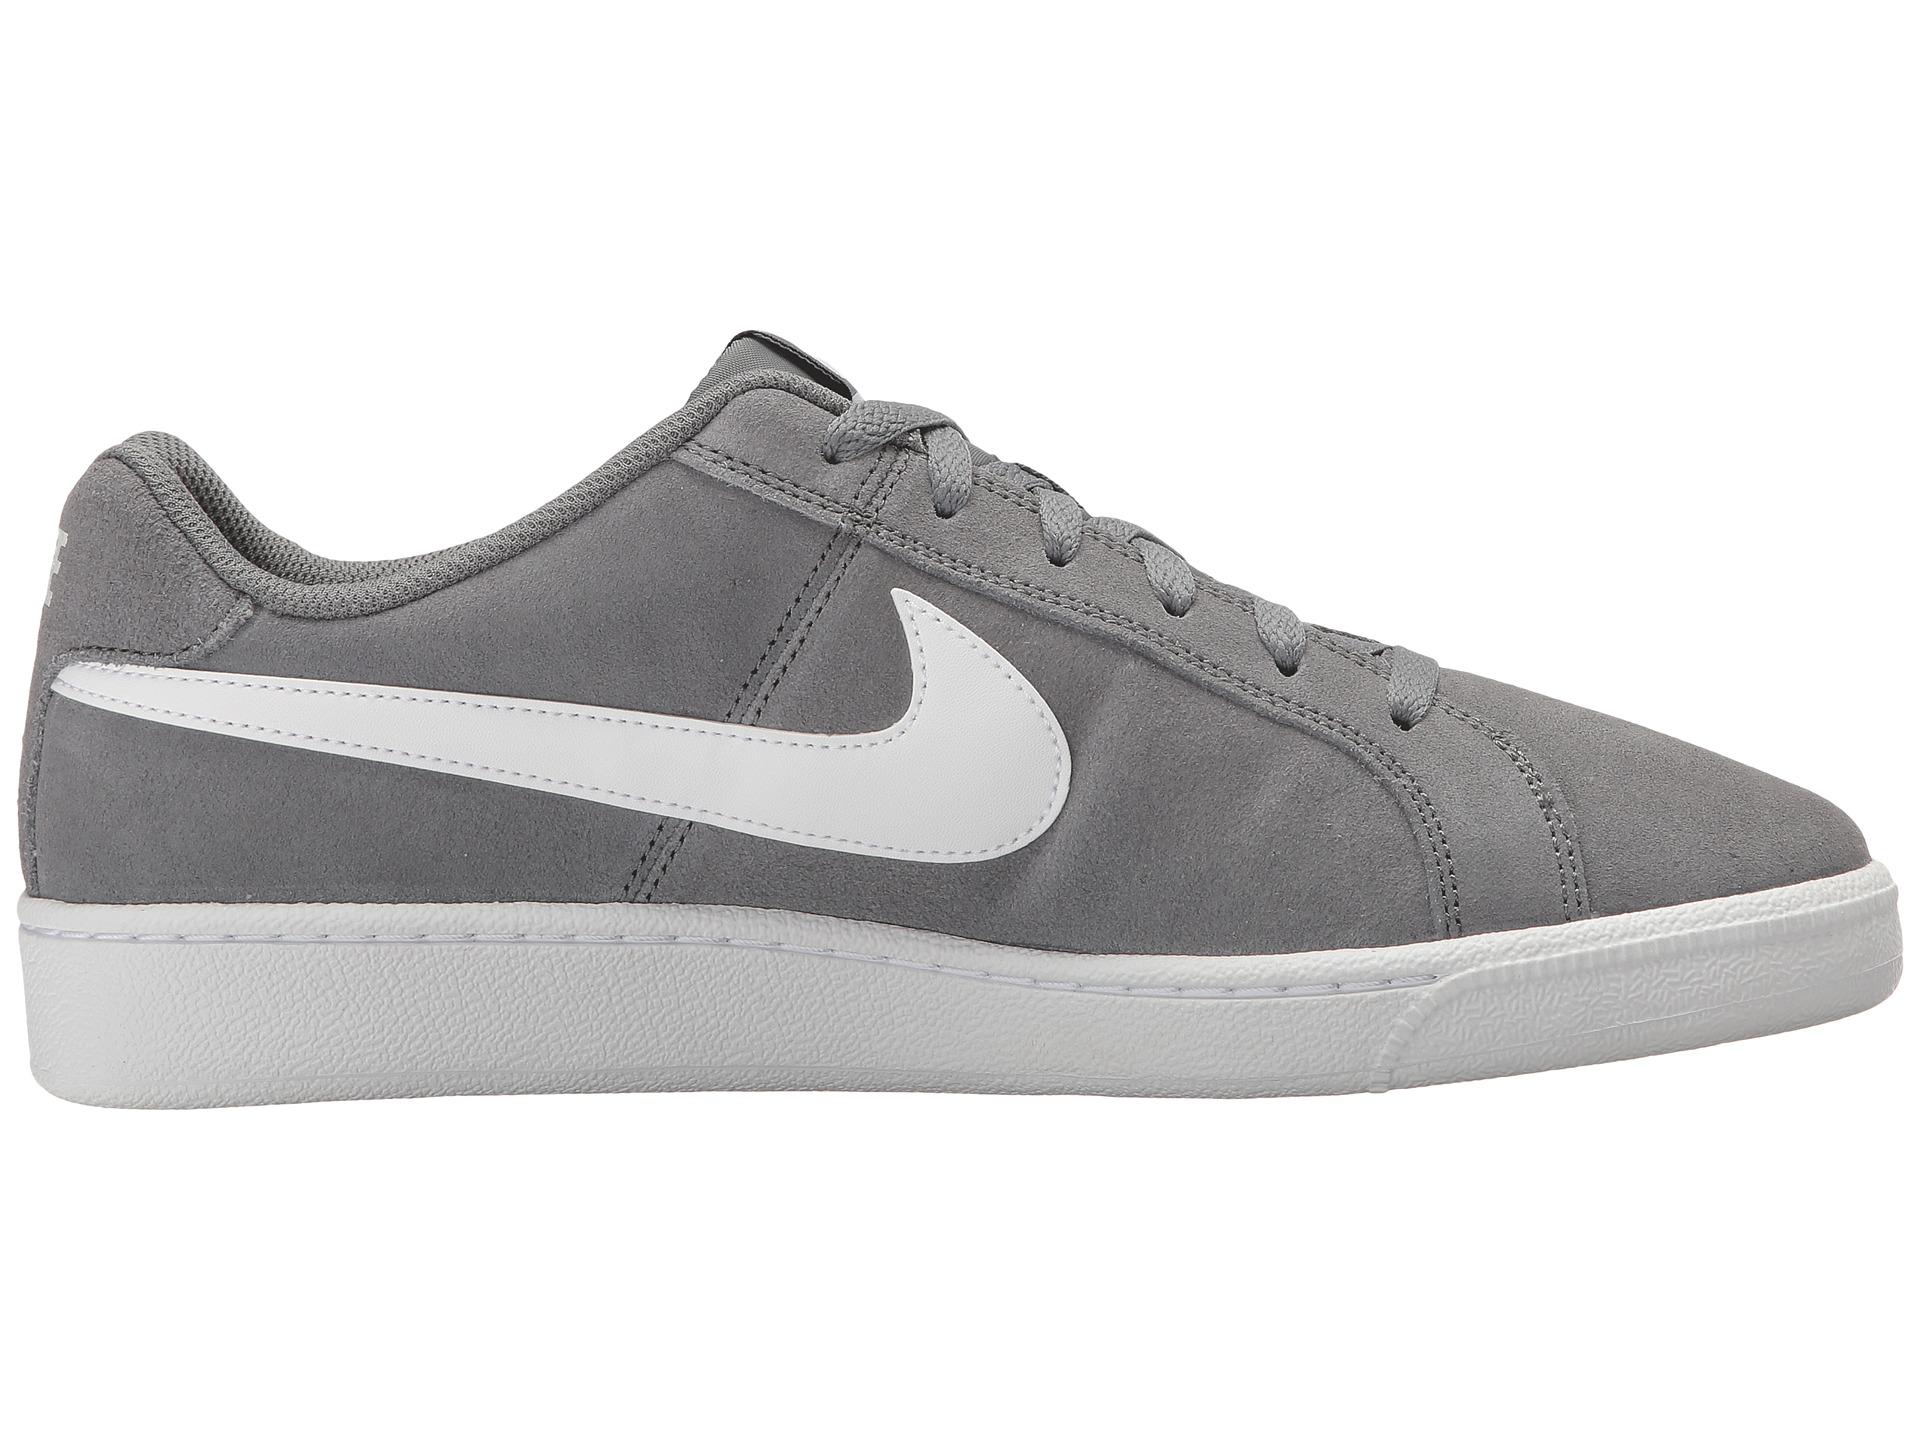 Nike Court Royale Suede in Cool Grey/White (Gray) for Men - Lyst